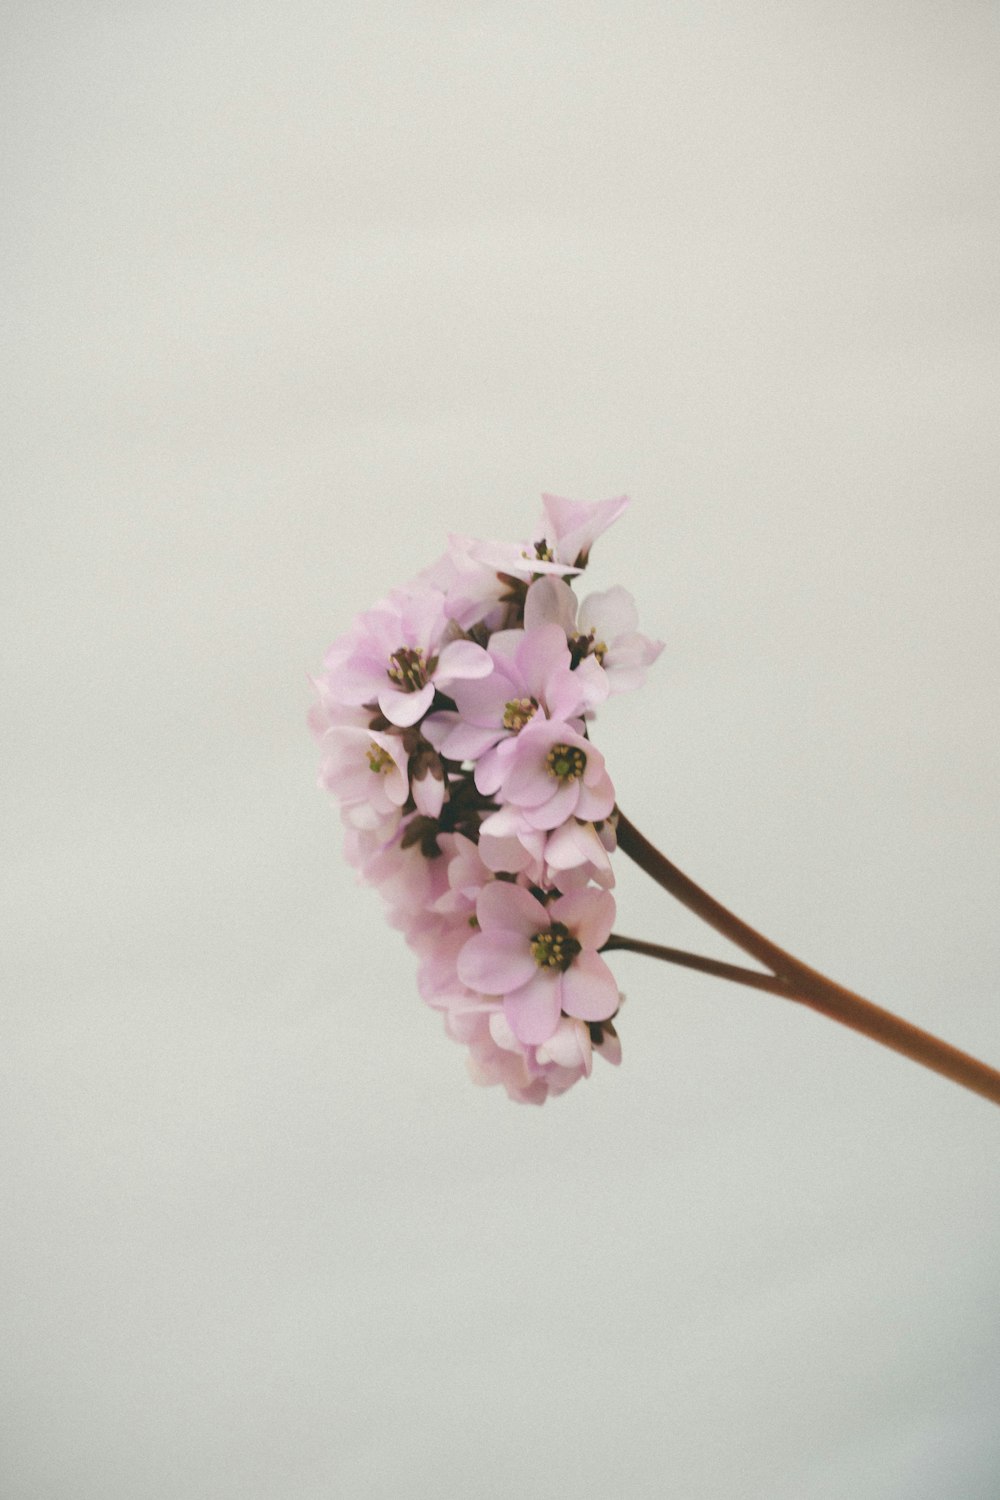 a branch of pink flowers against a white background